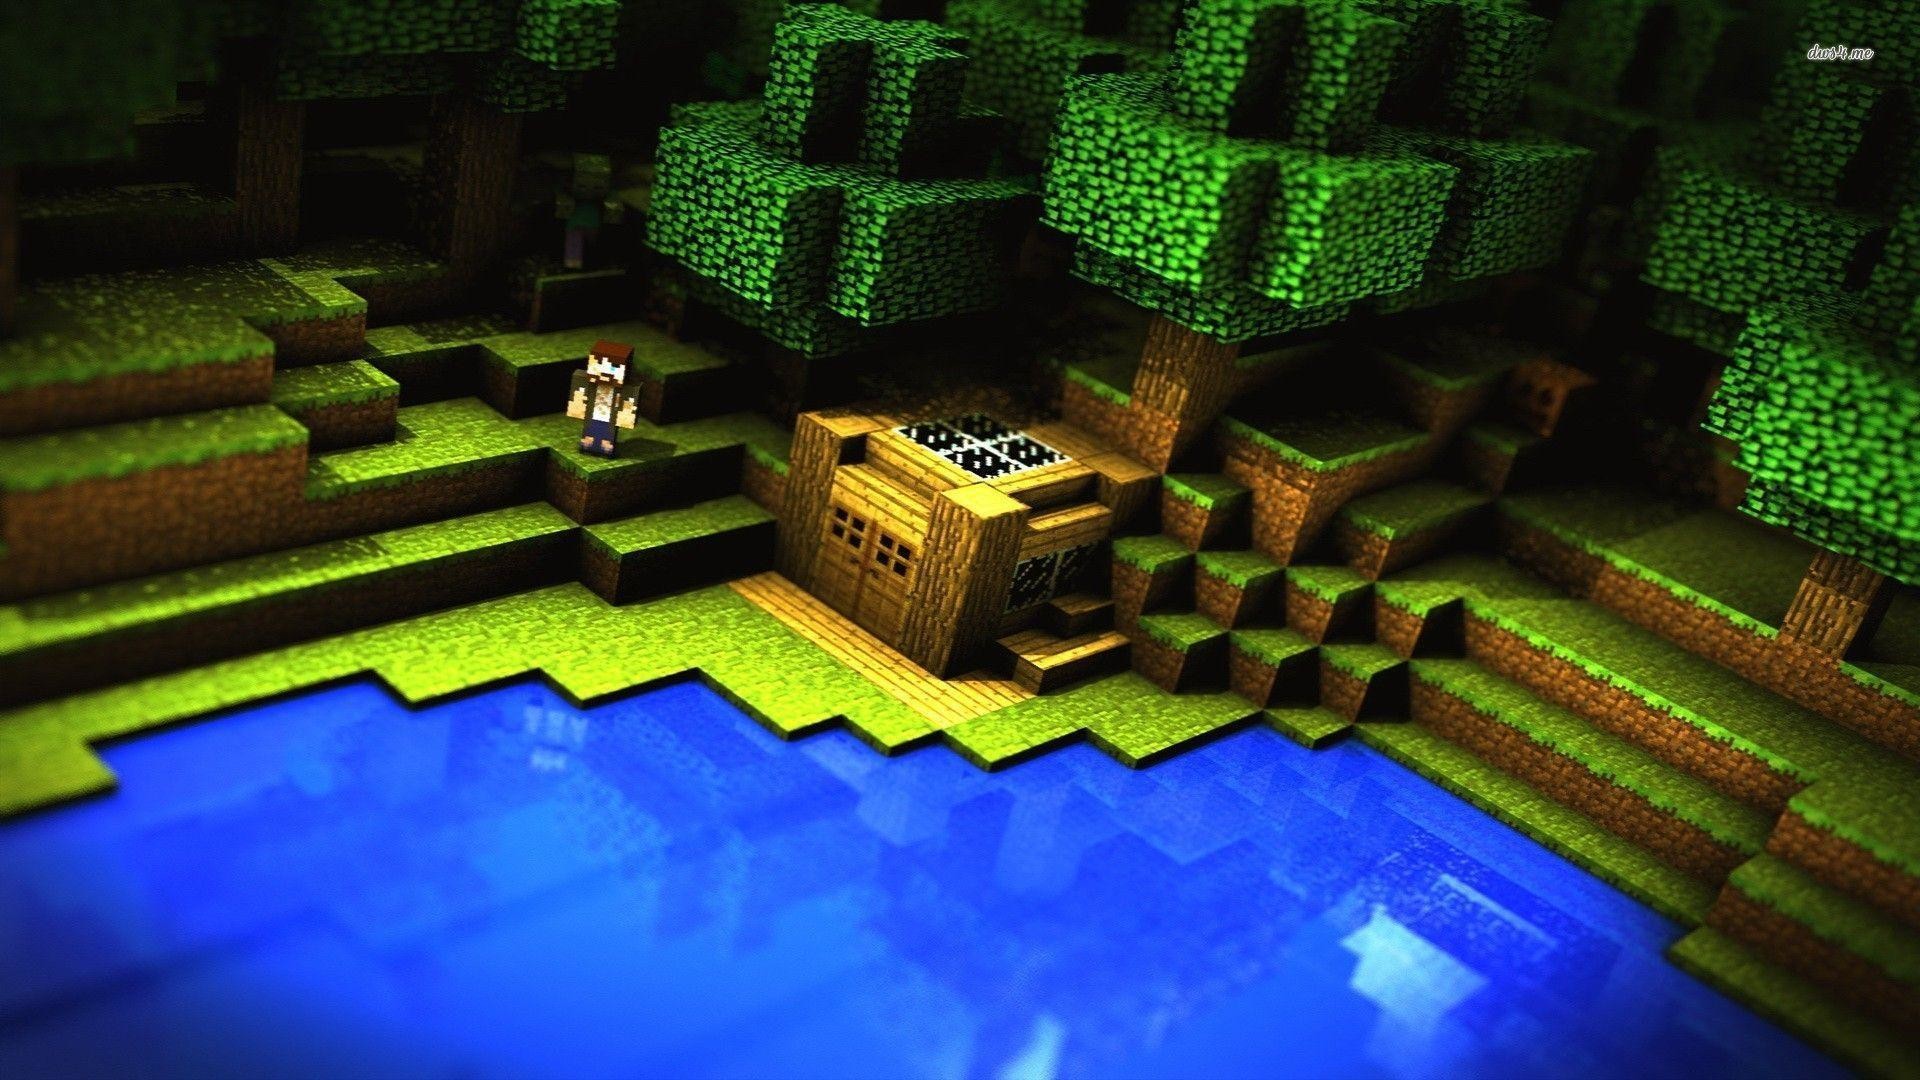 1920x1080 Minecraft Backgrounds For Your Computer - Wallpaper Cave